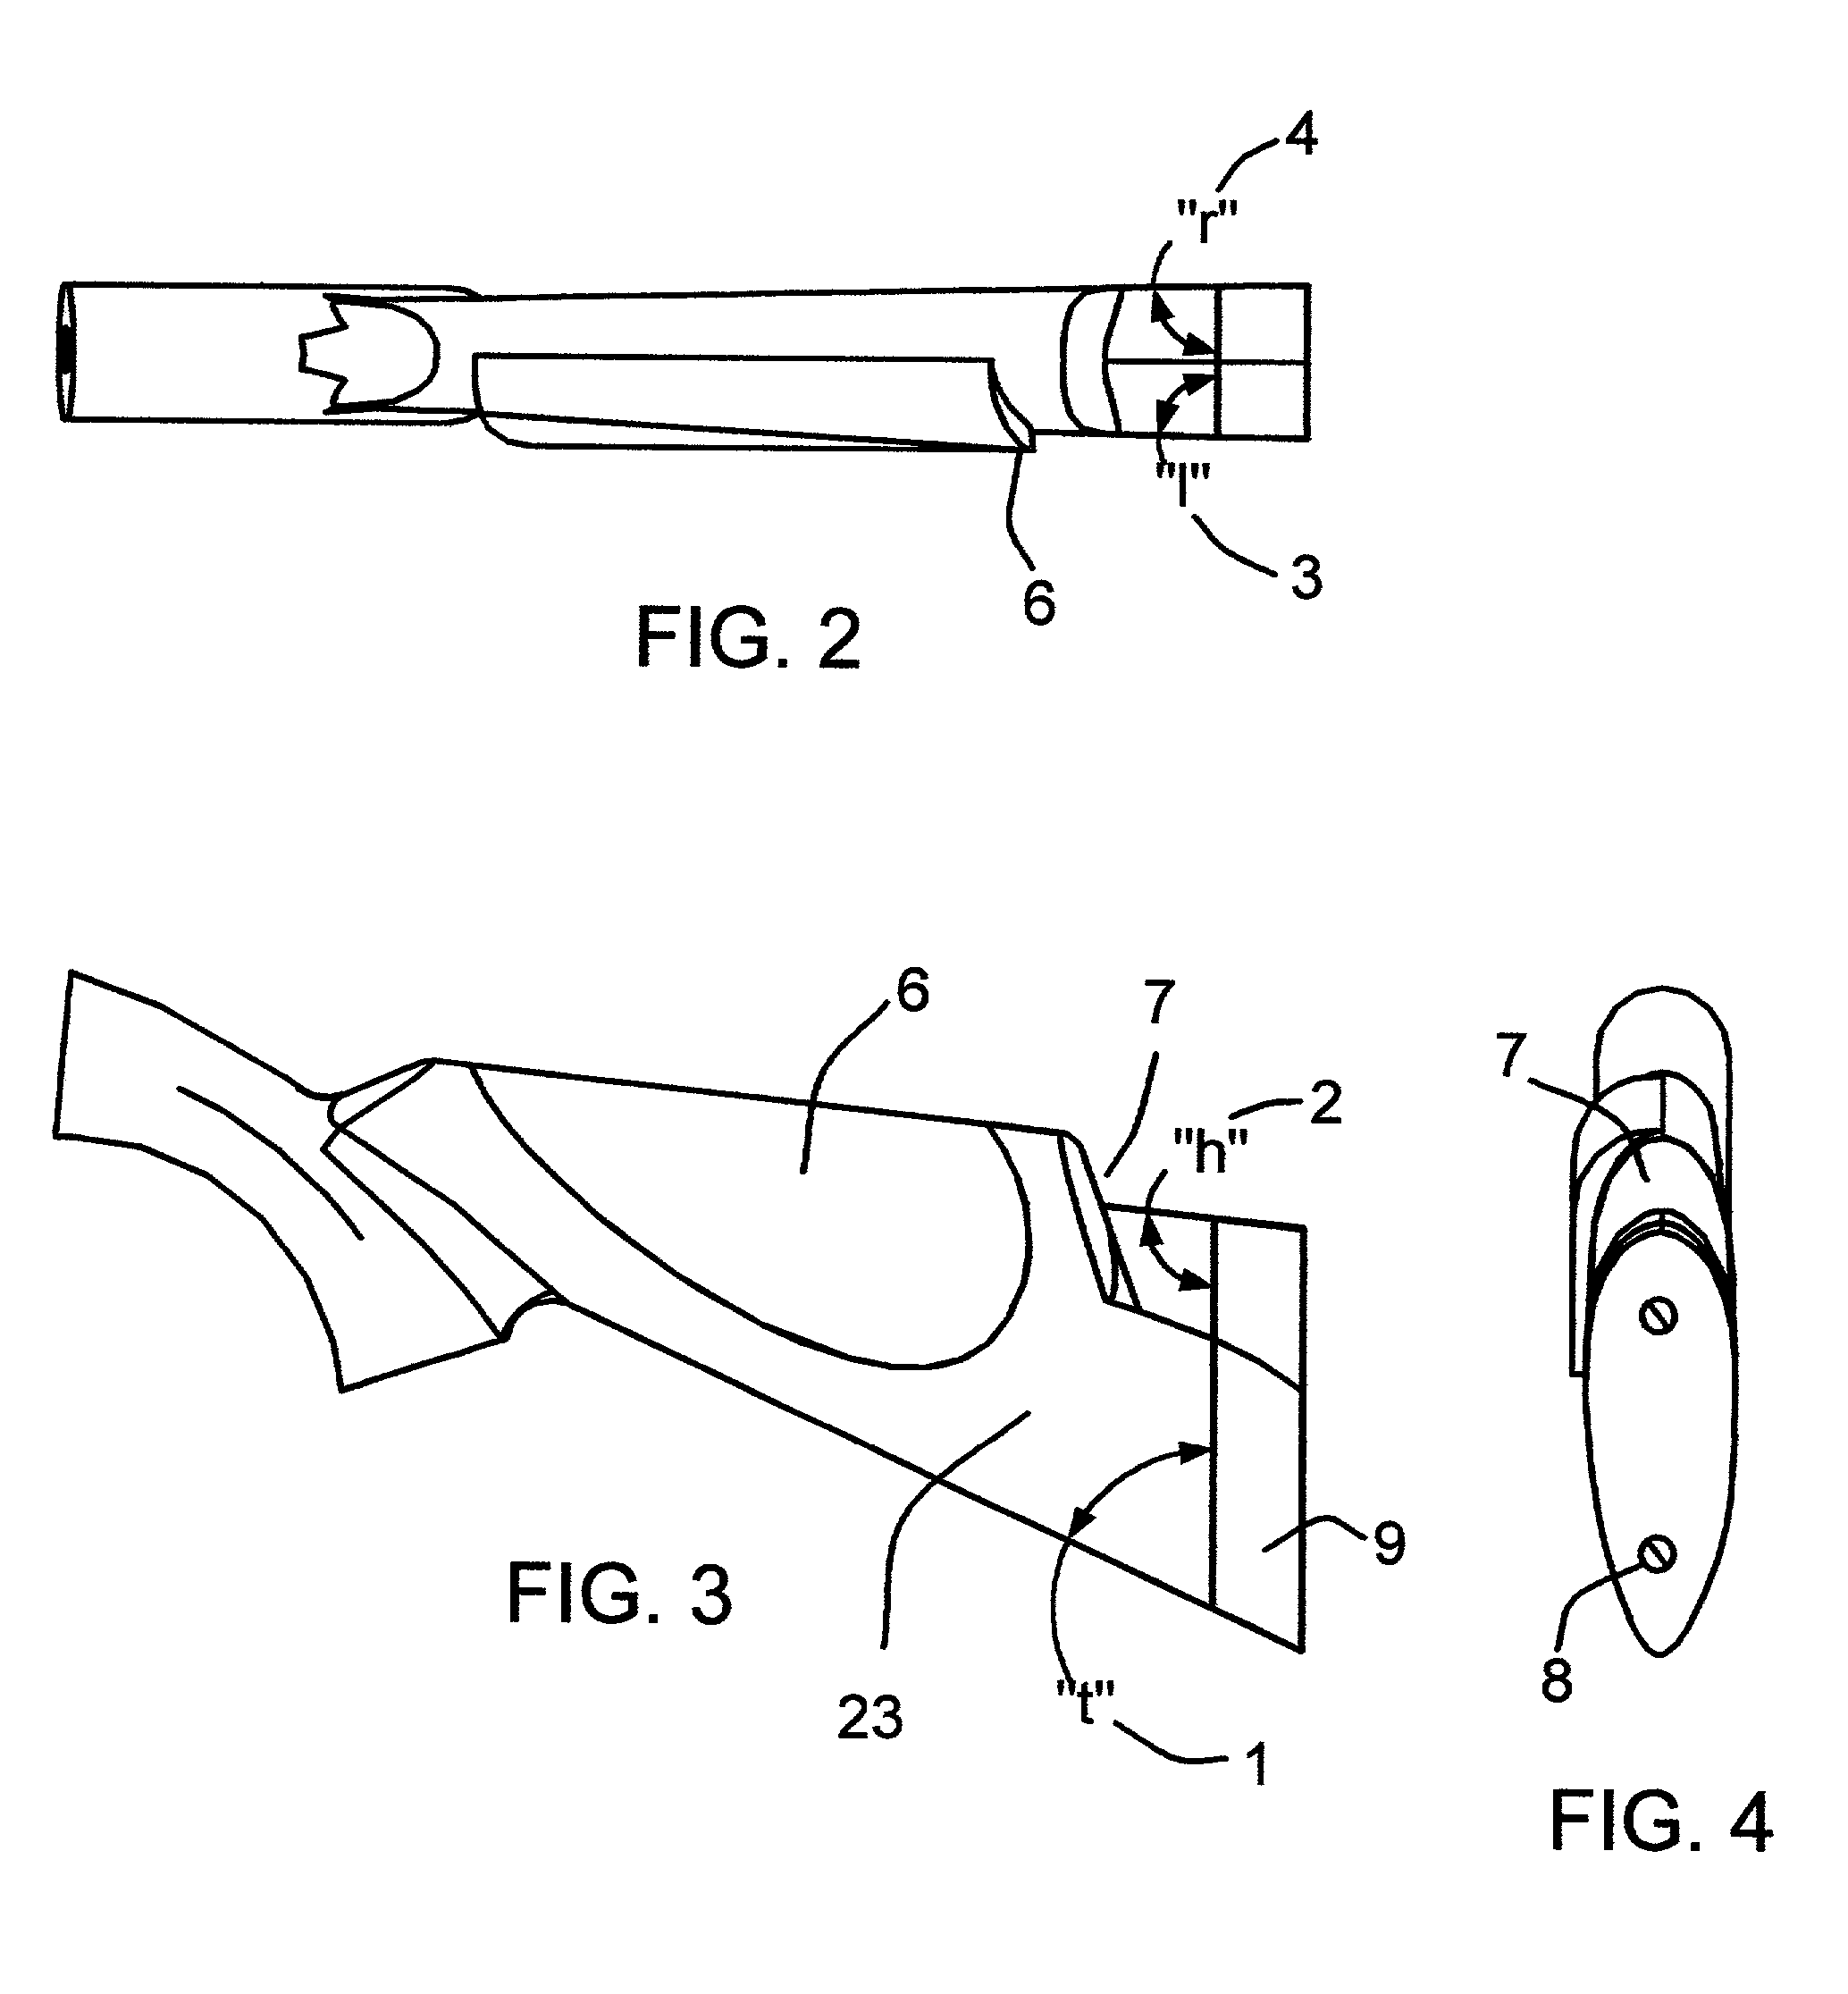 Method and apparatus for precisely fitting, reproducing, and creating 3-dimensional objects from digitized and/or parametric data inputs using computer aided design and manufacturing technology